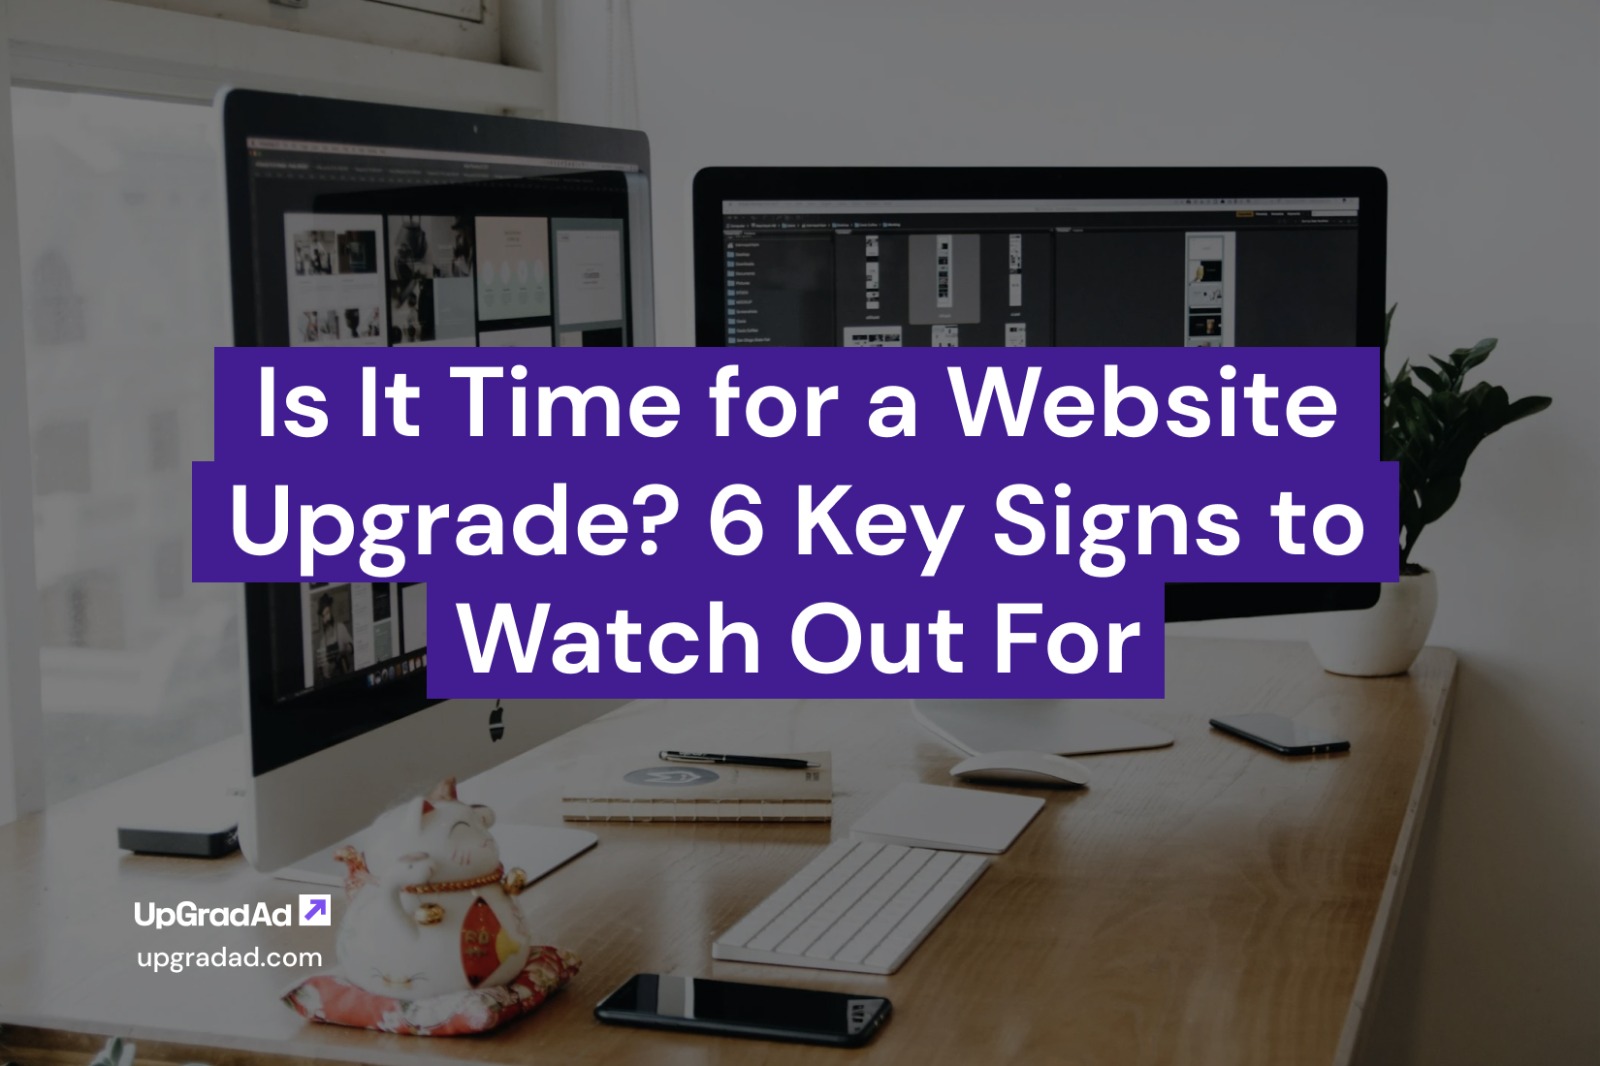 is it time for website upgrade - UpGradAd